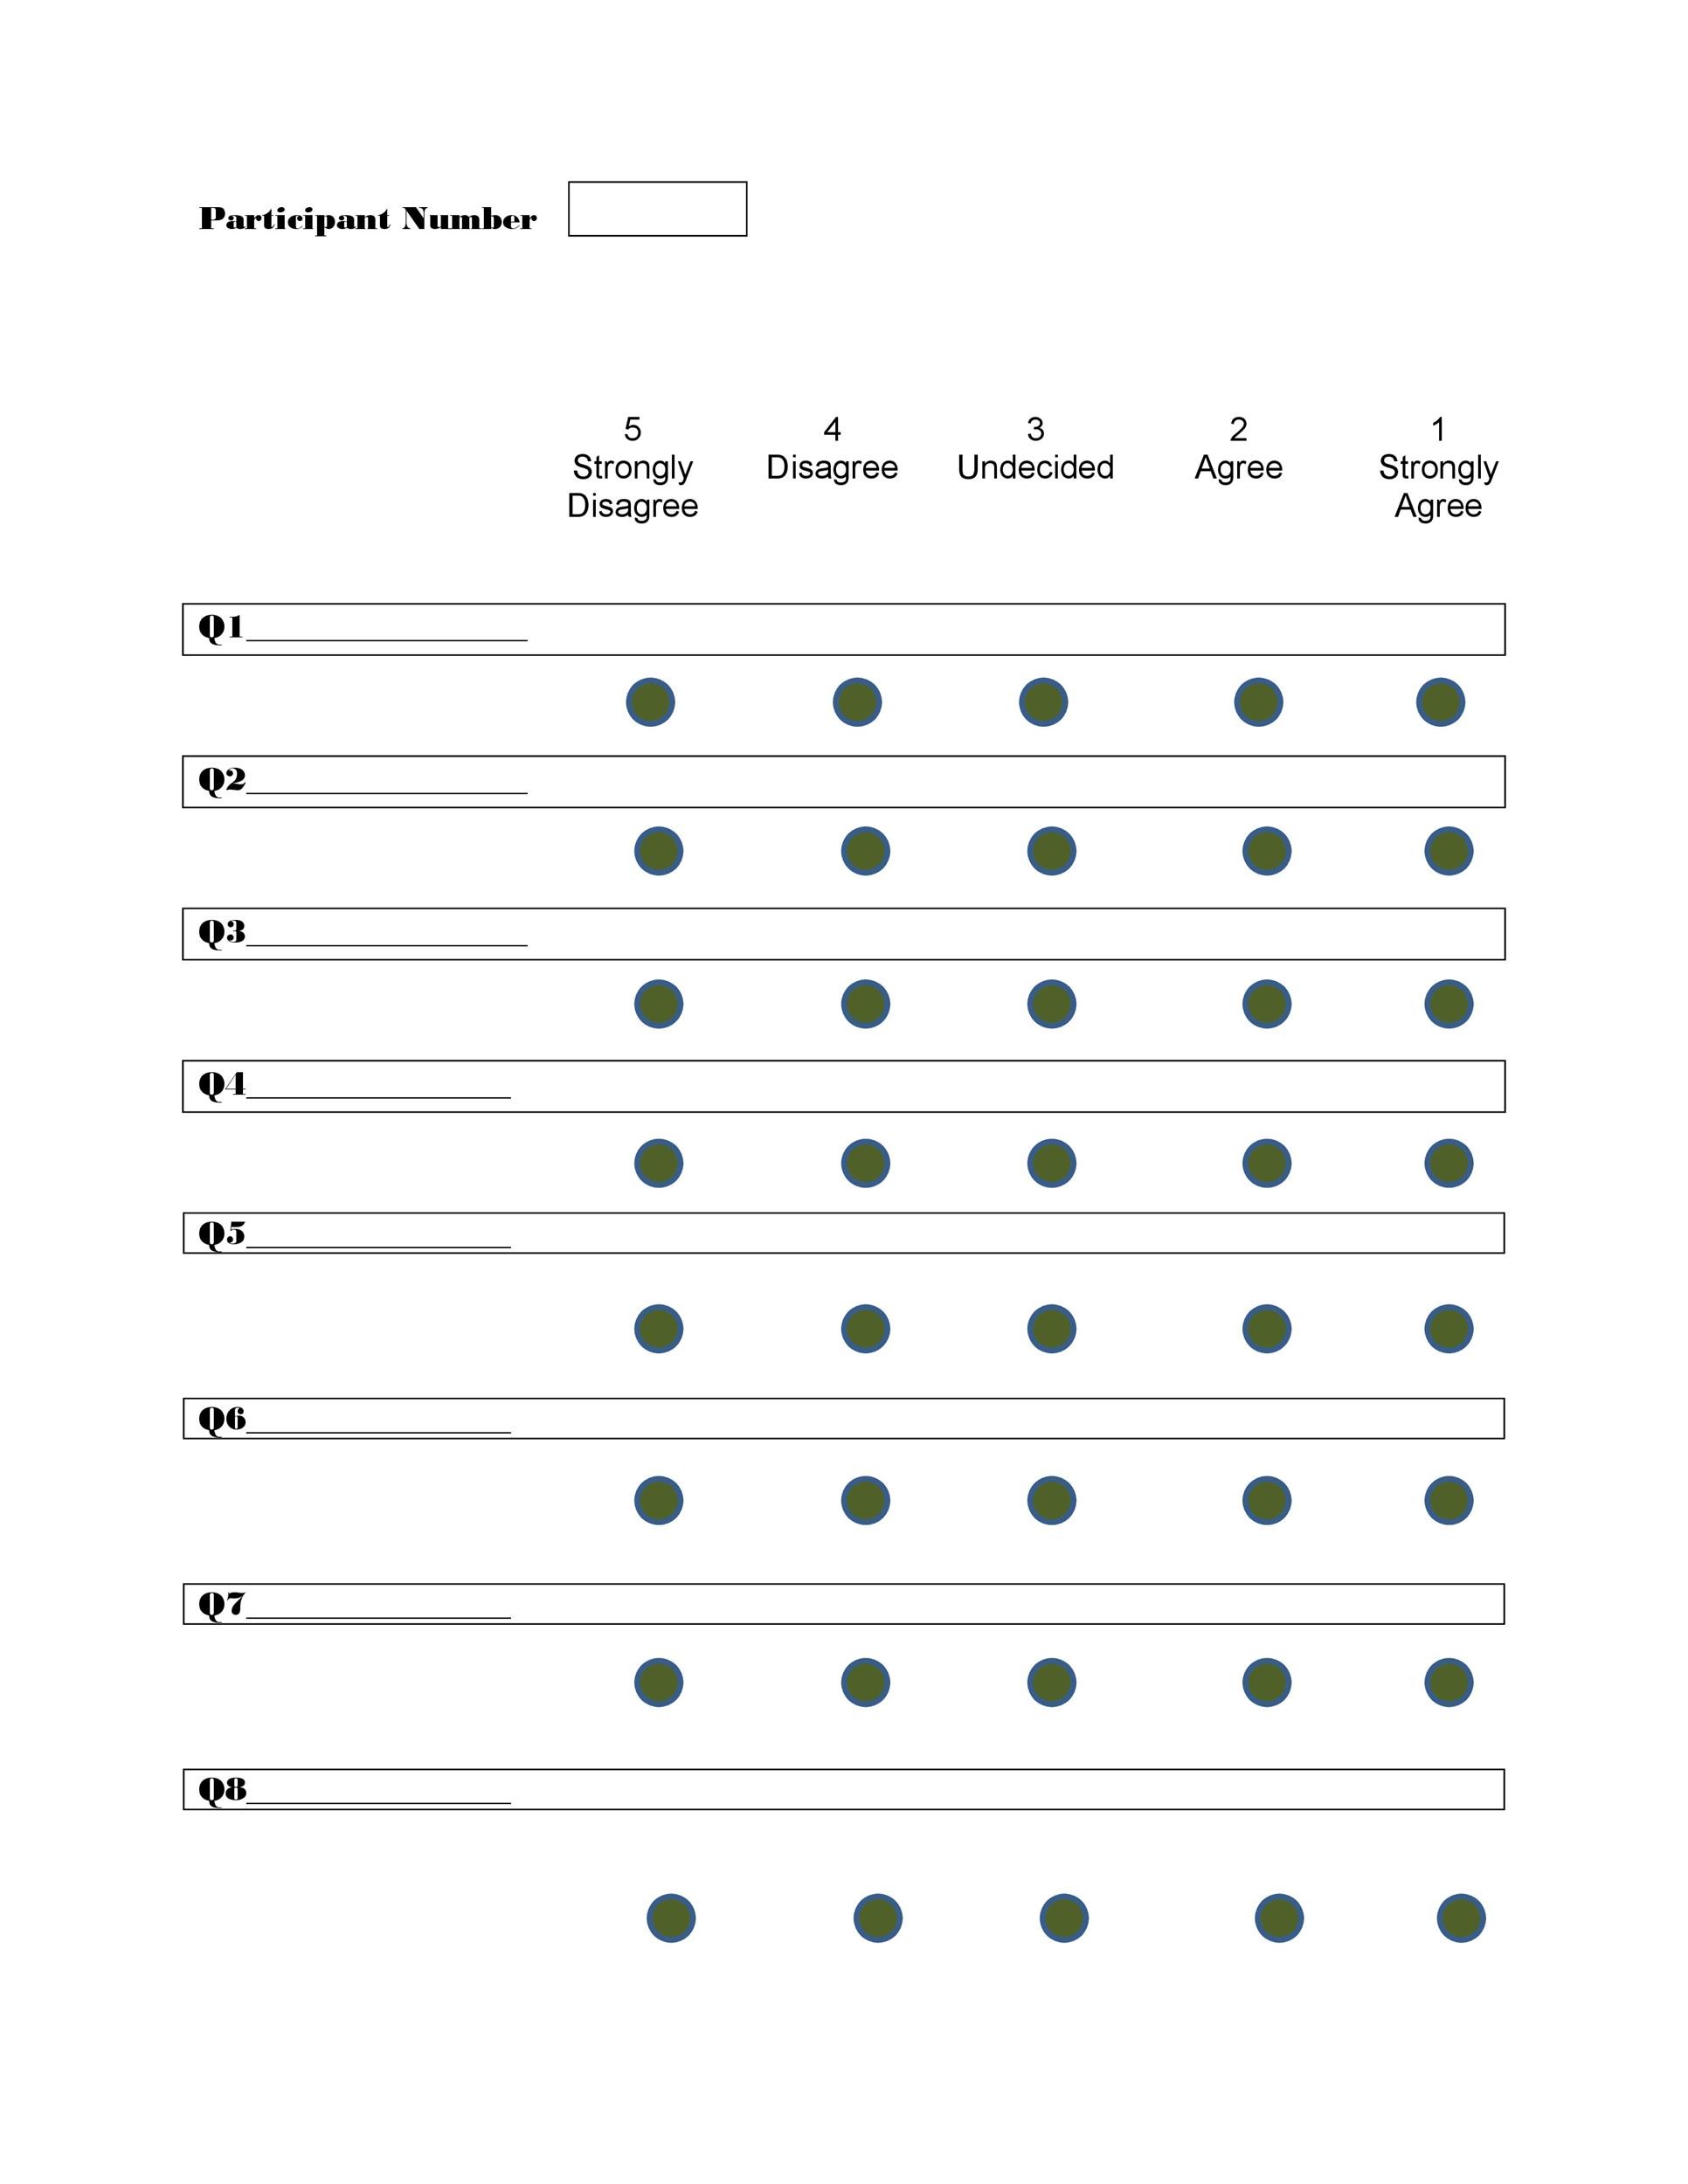 30 Free Likert Scale Templates & Examples - Template Lab 14F